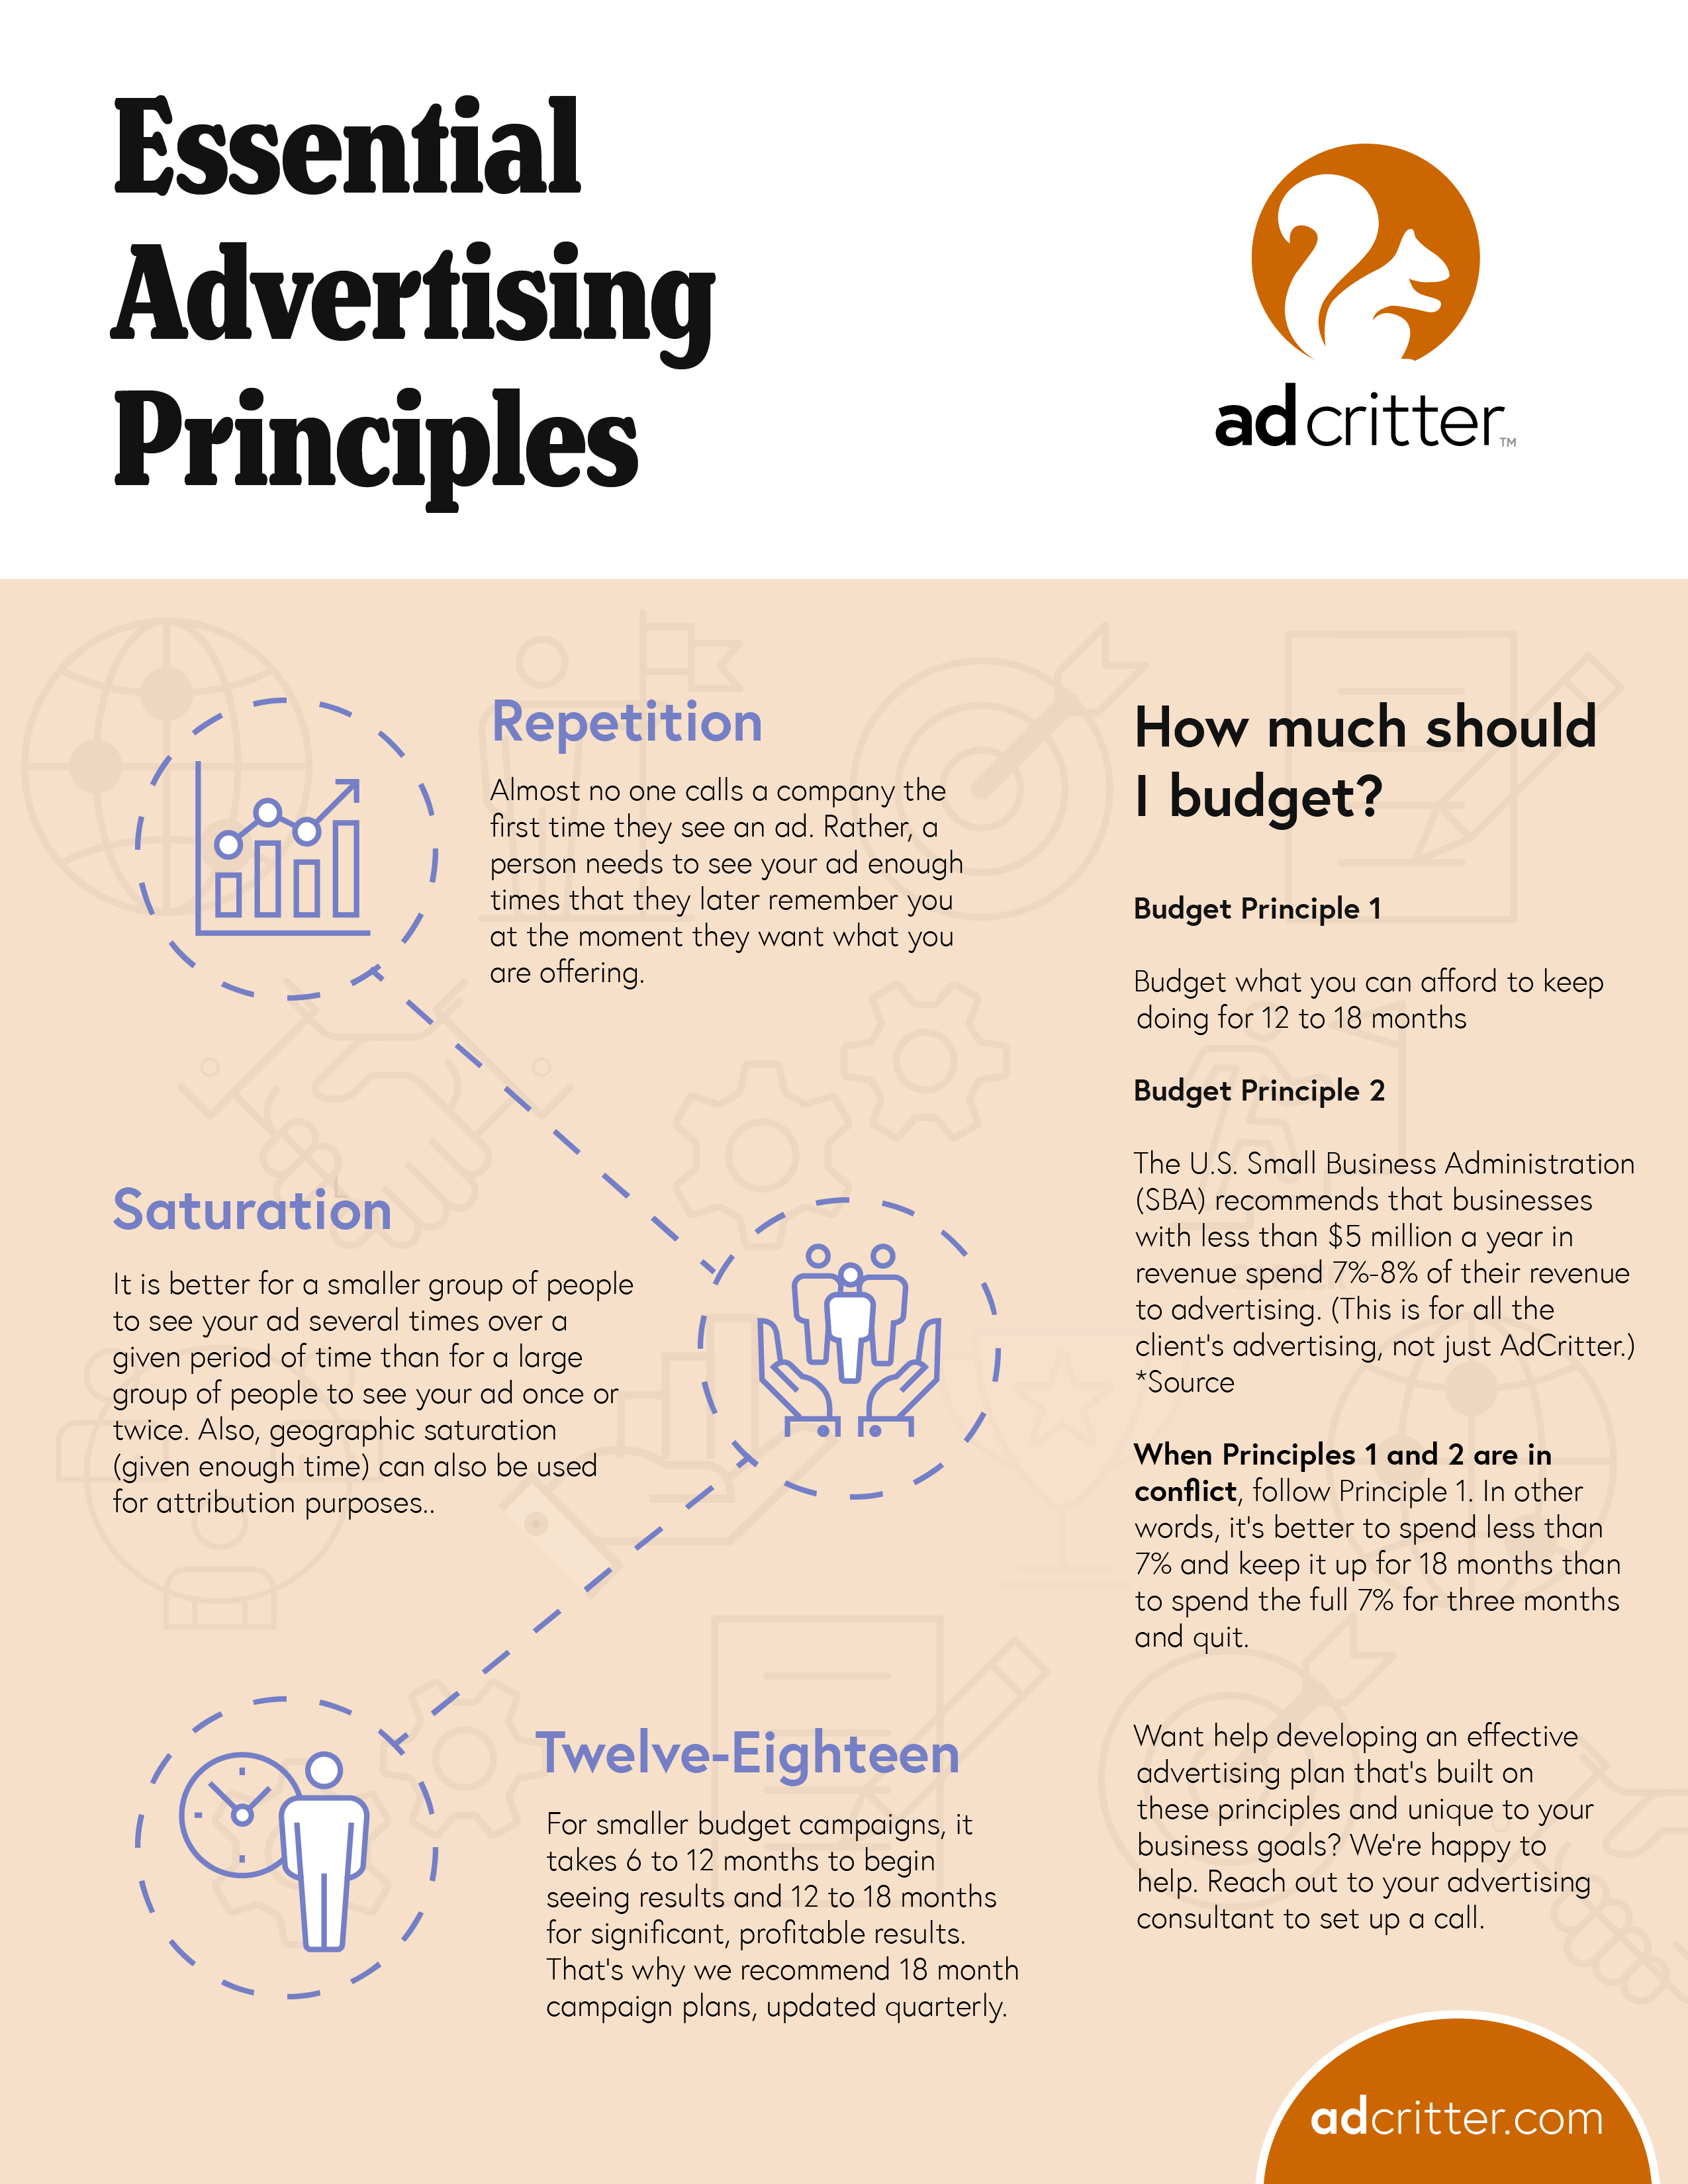 Adcritter's Effective Advertising Principles